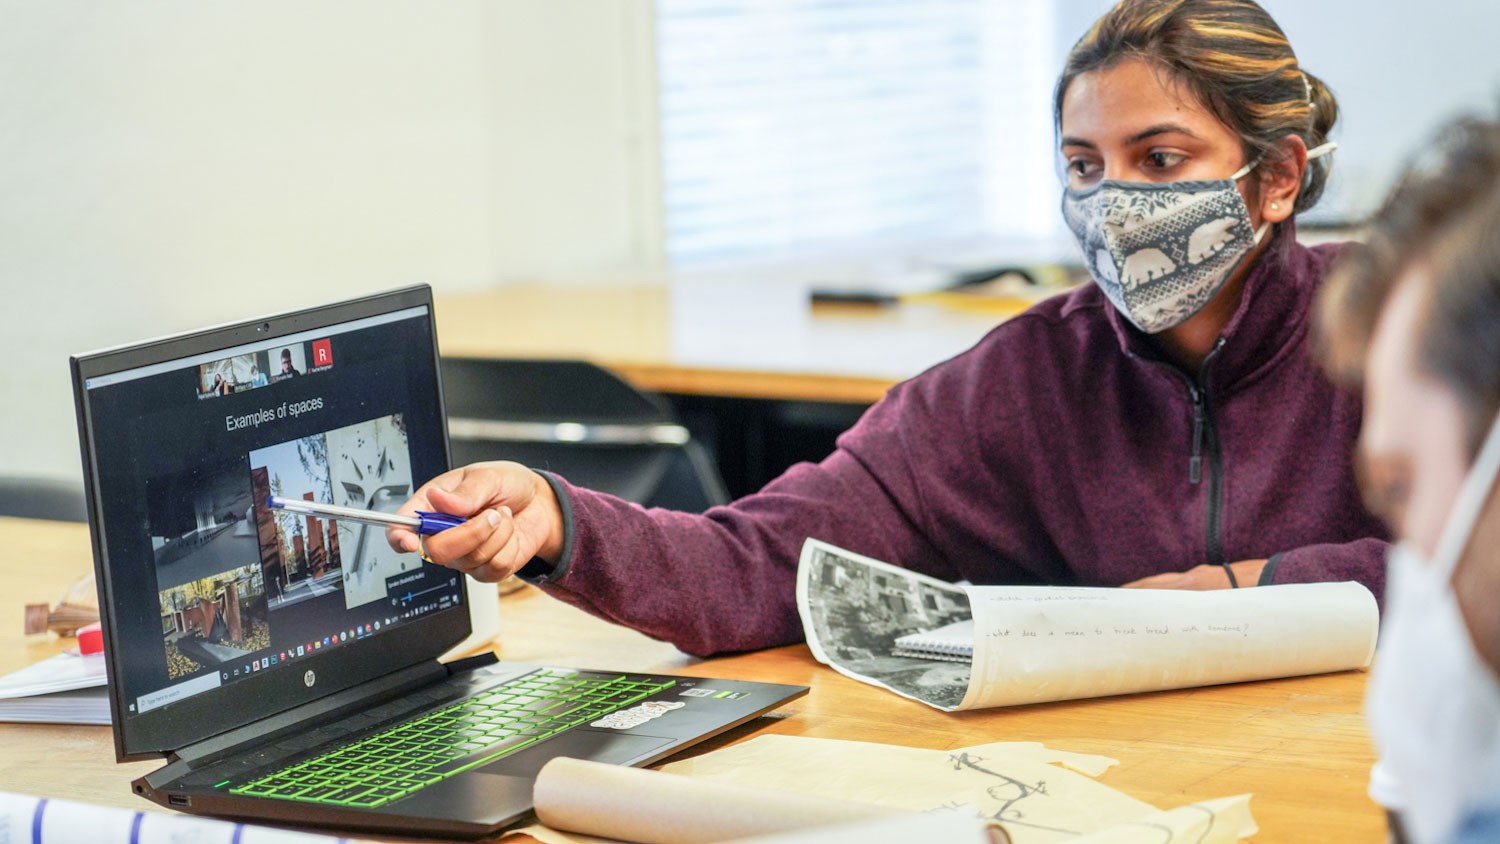 Students in face coverings looking at a computer